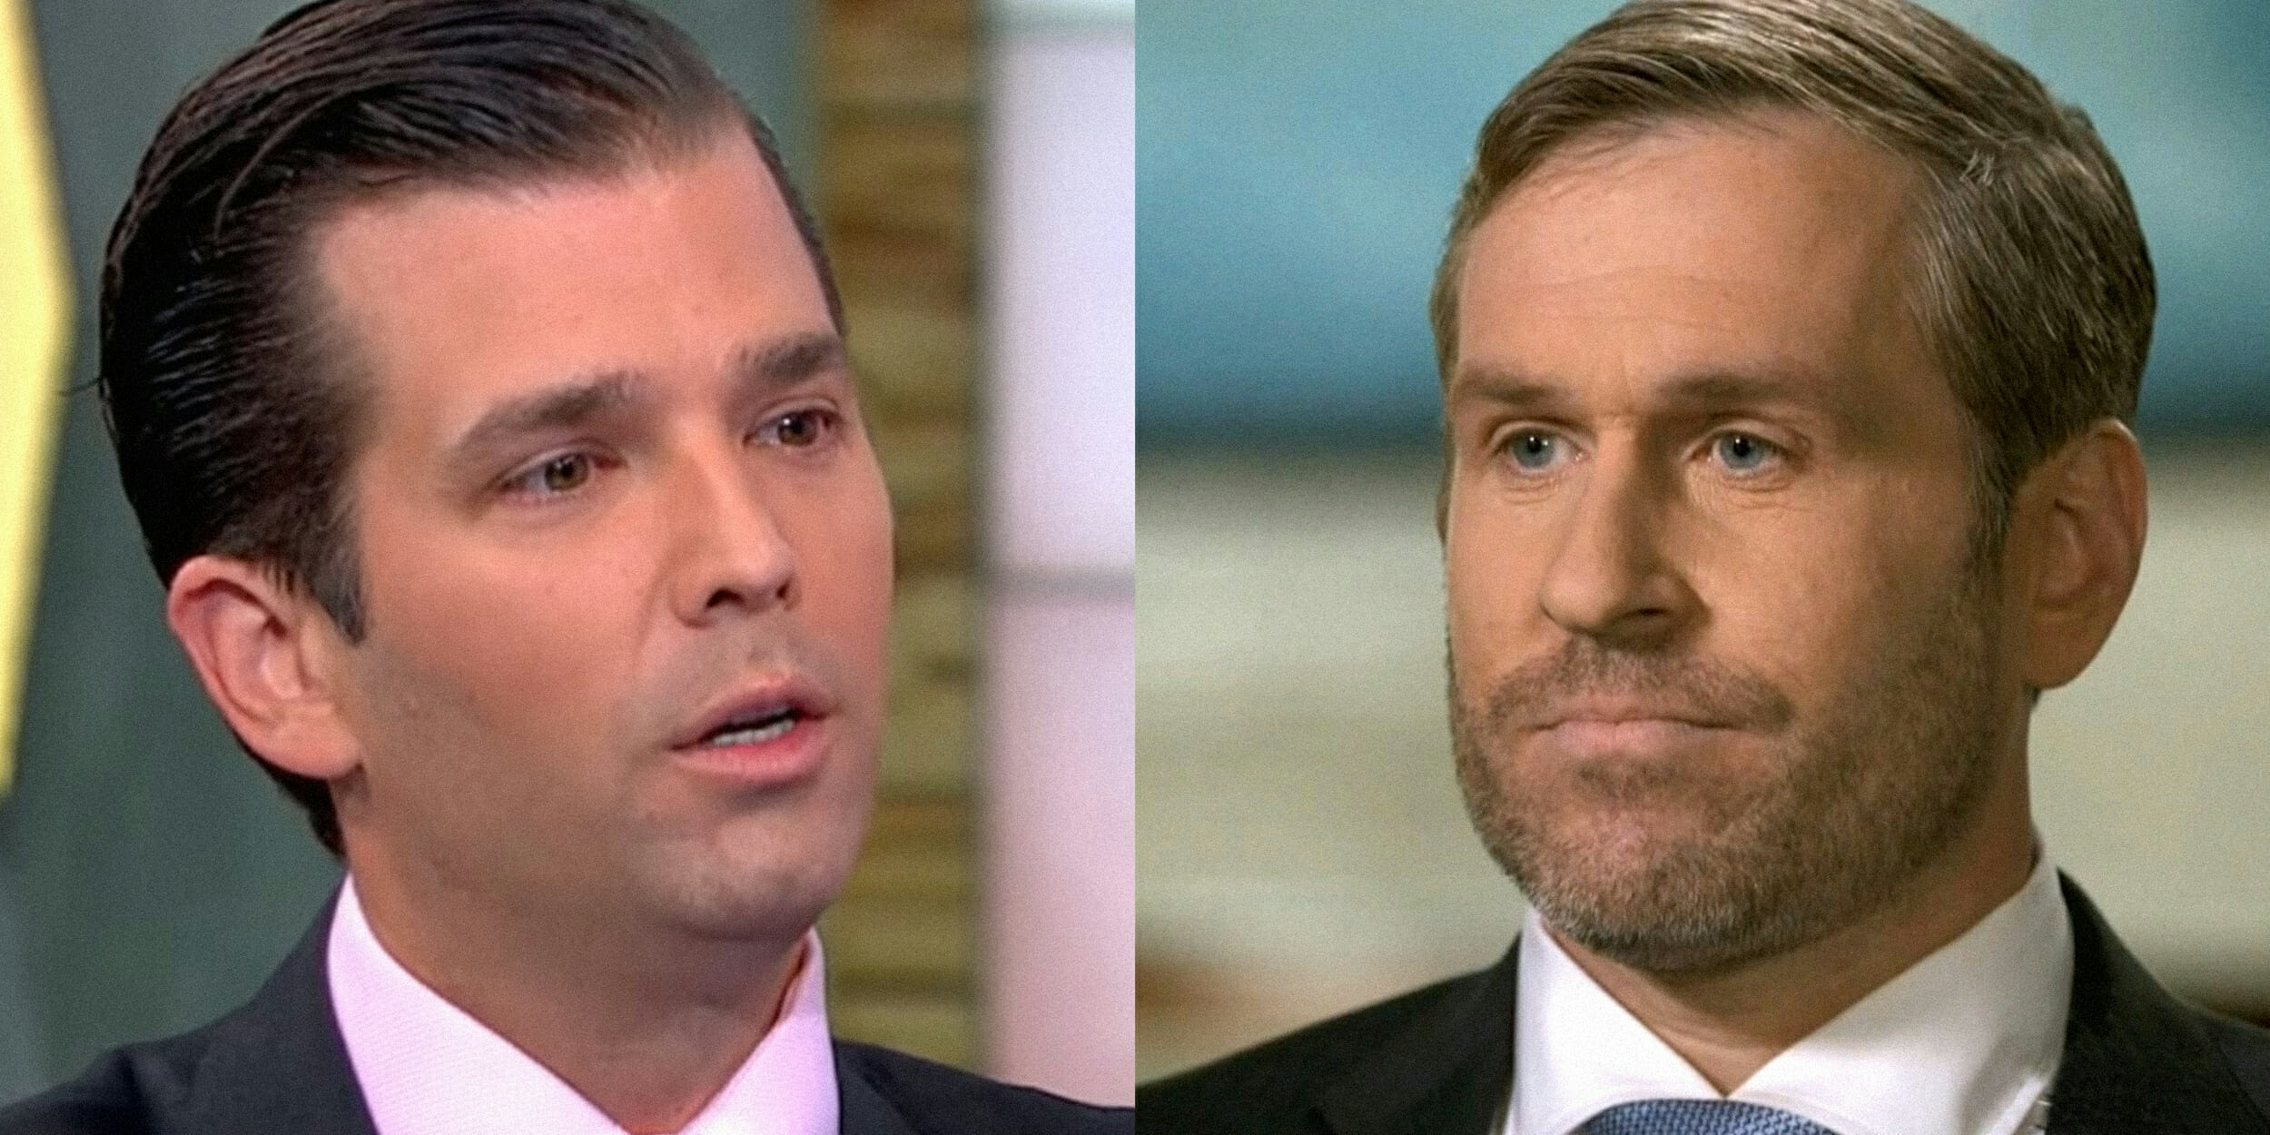 Donald Trump, Jr. and Mike Cernovich